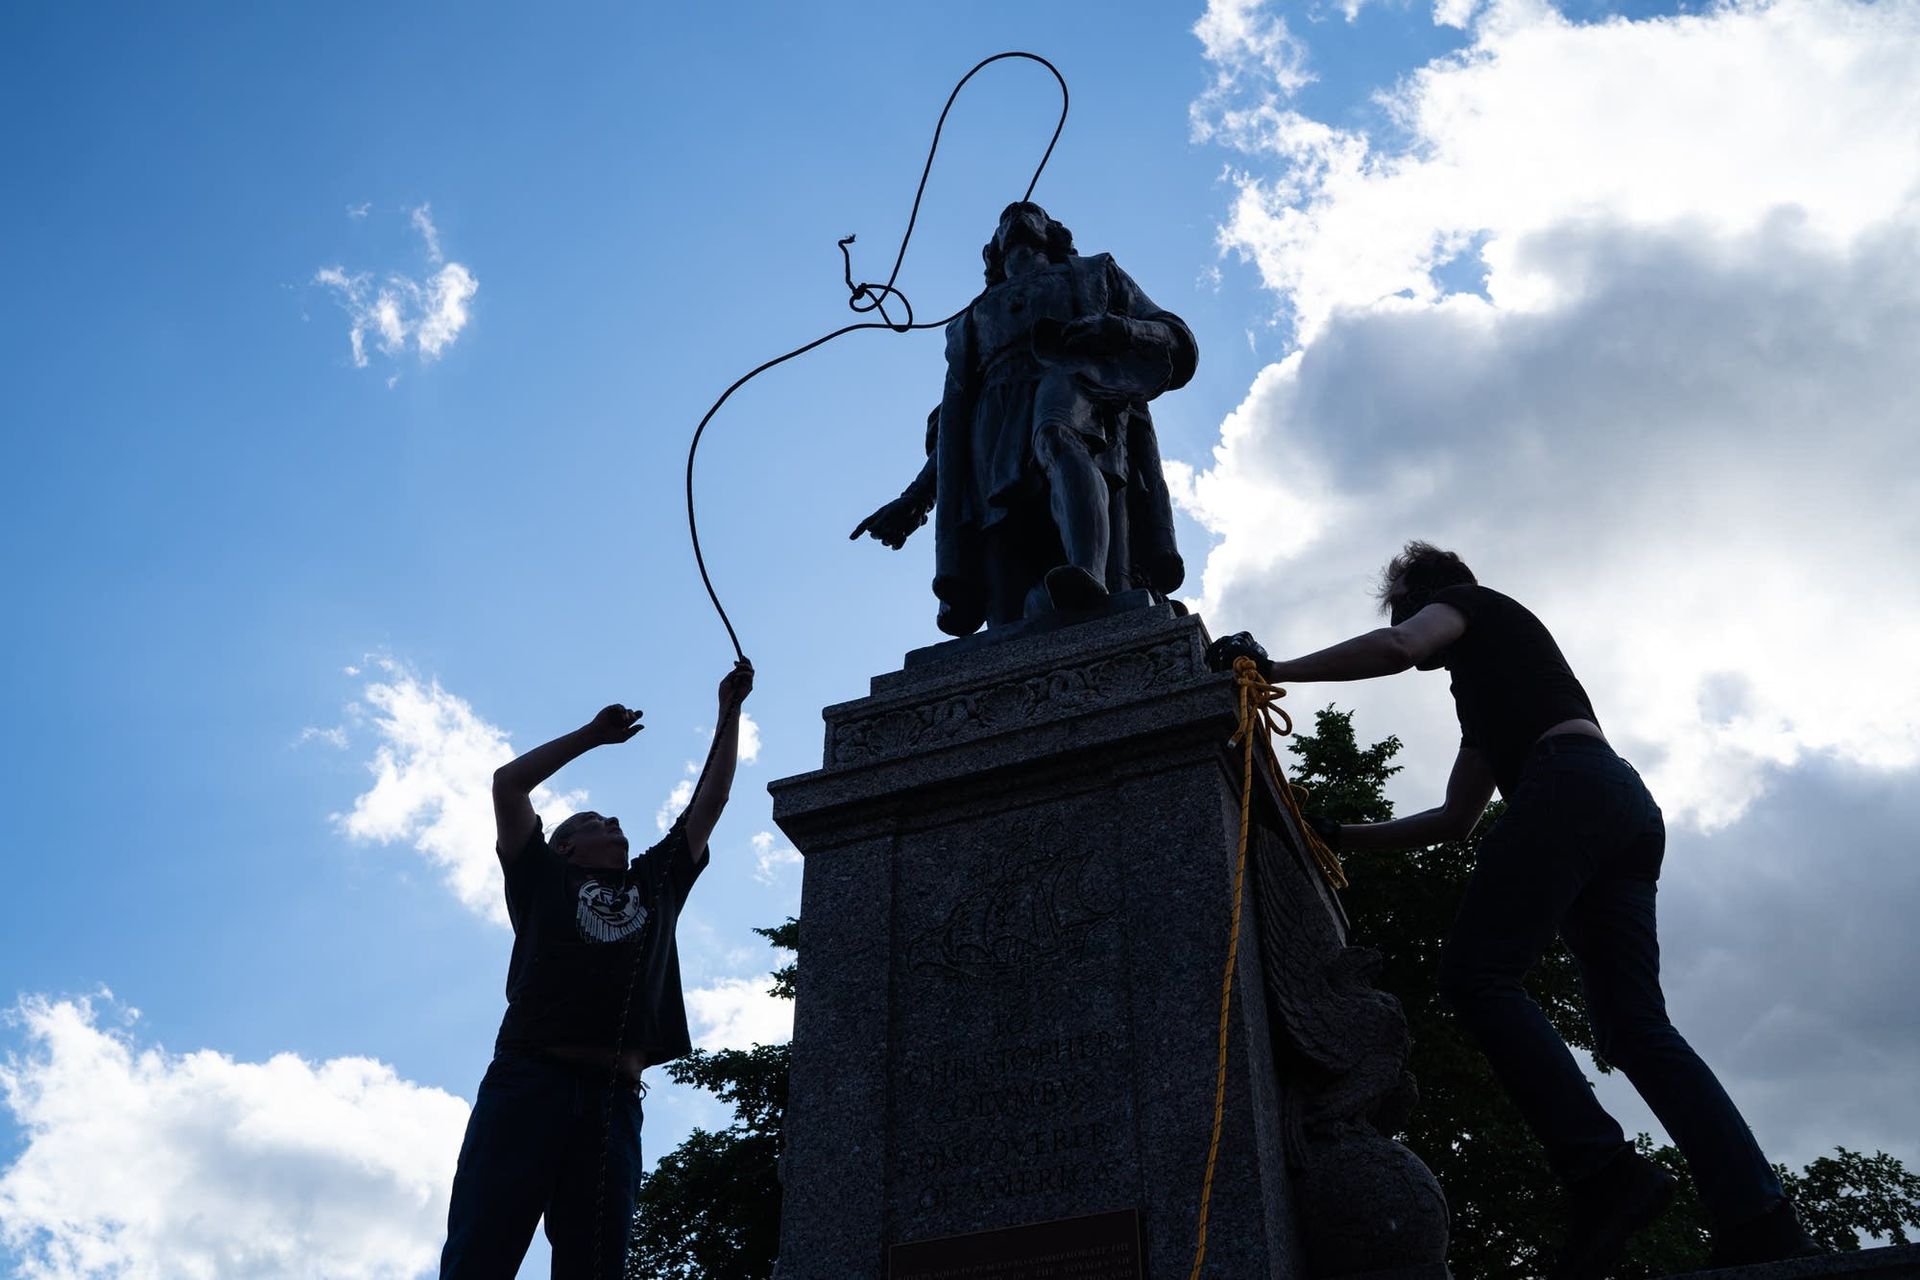 Two men fasten ropes around the neck of a statue of Christopher Columbus at the Minnesota State Capitol in St. Paul on June 10, 2020 Photo: Evan Frost